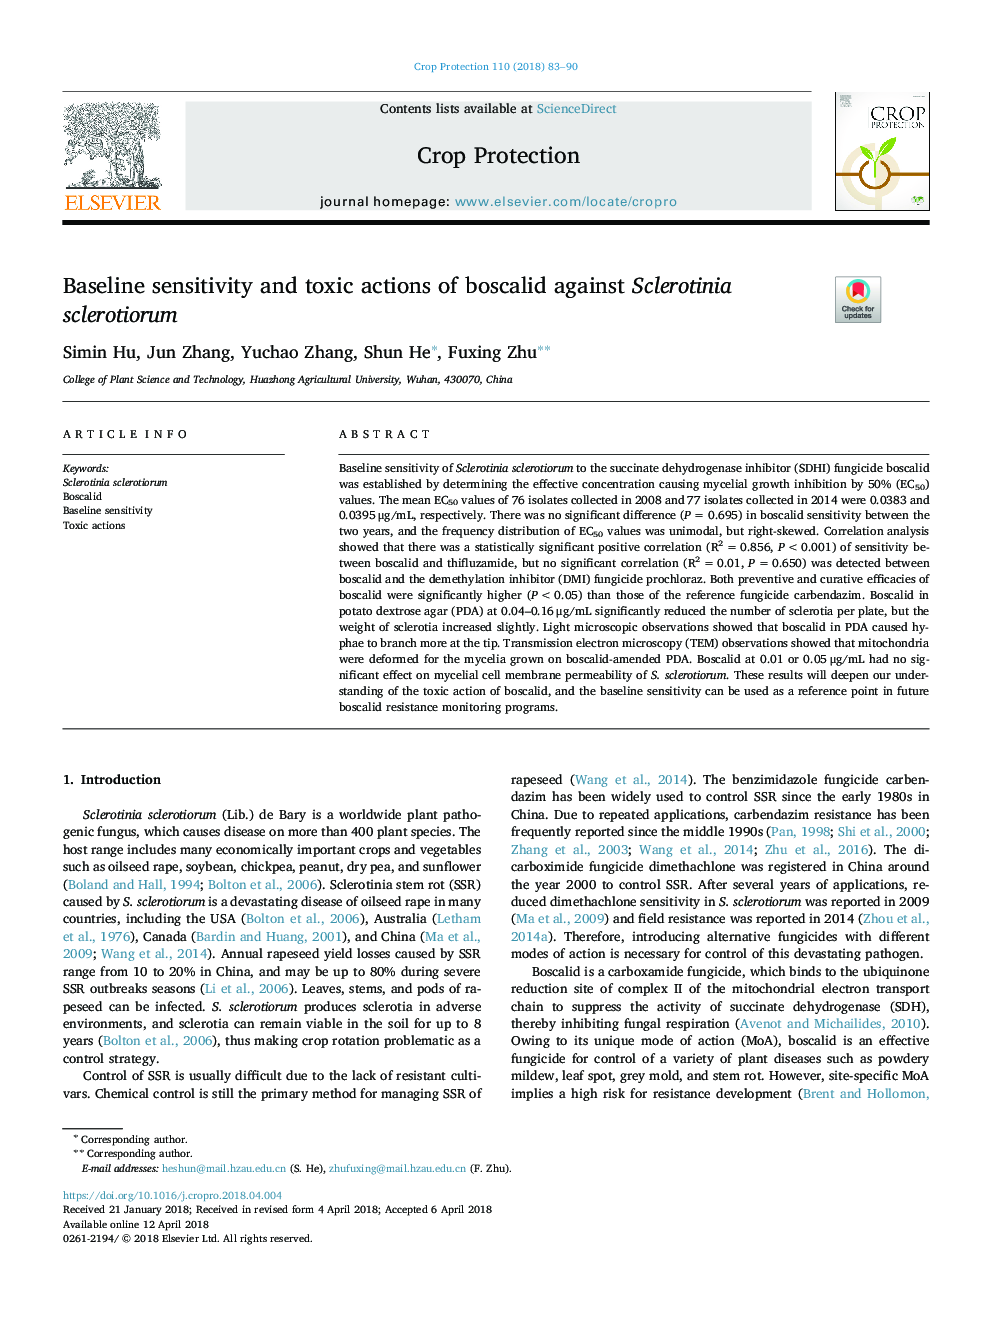 Baseline sensitivity and toxic actions of boscalid against Sclerotinia sclerotiorum